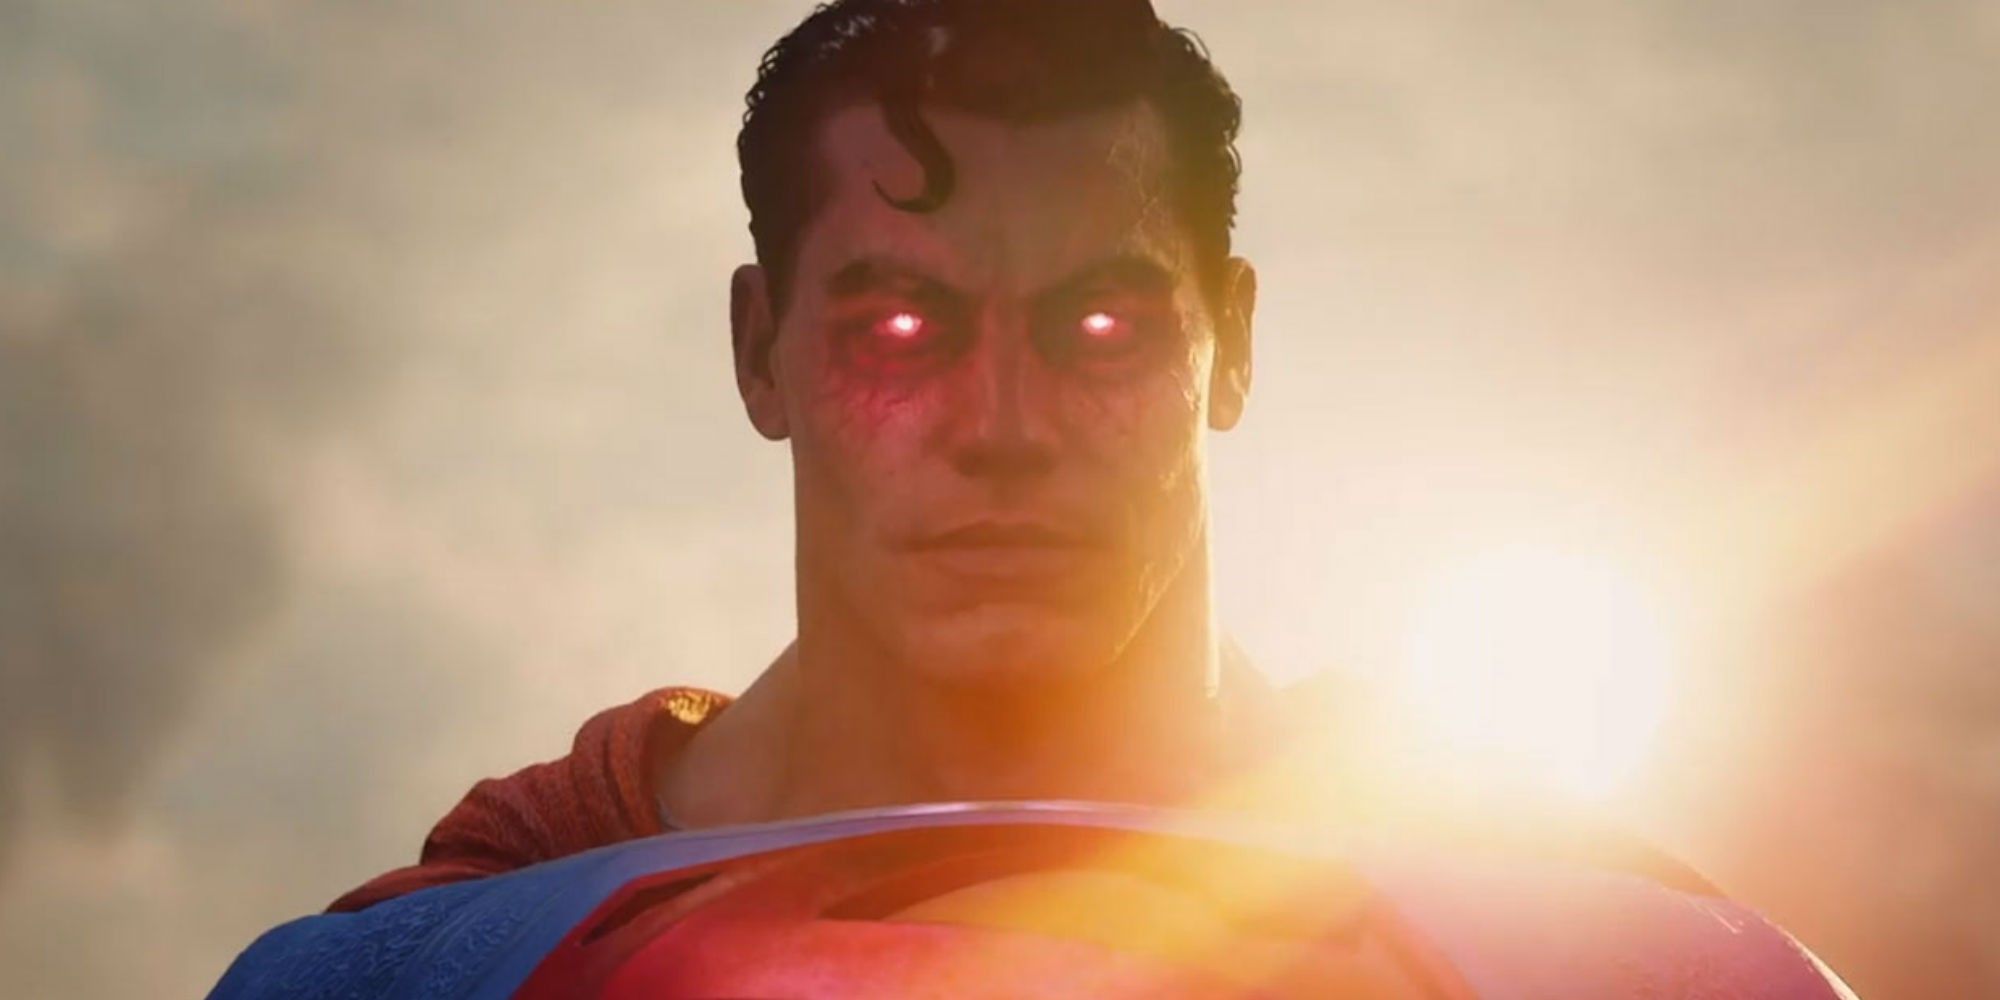 Superman controlled by Brainiac in Suicide Squad: Kill the Justice League.